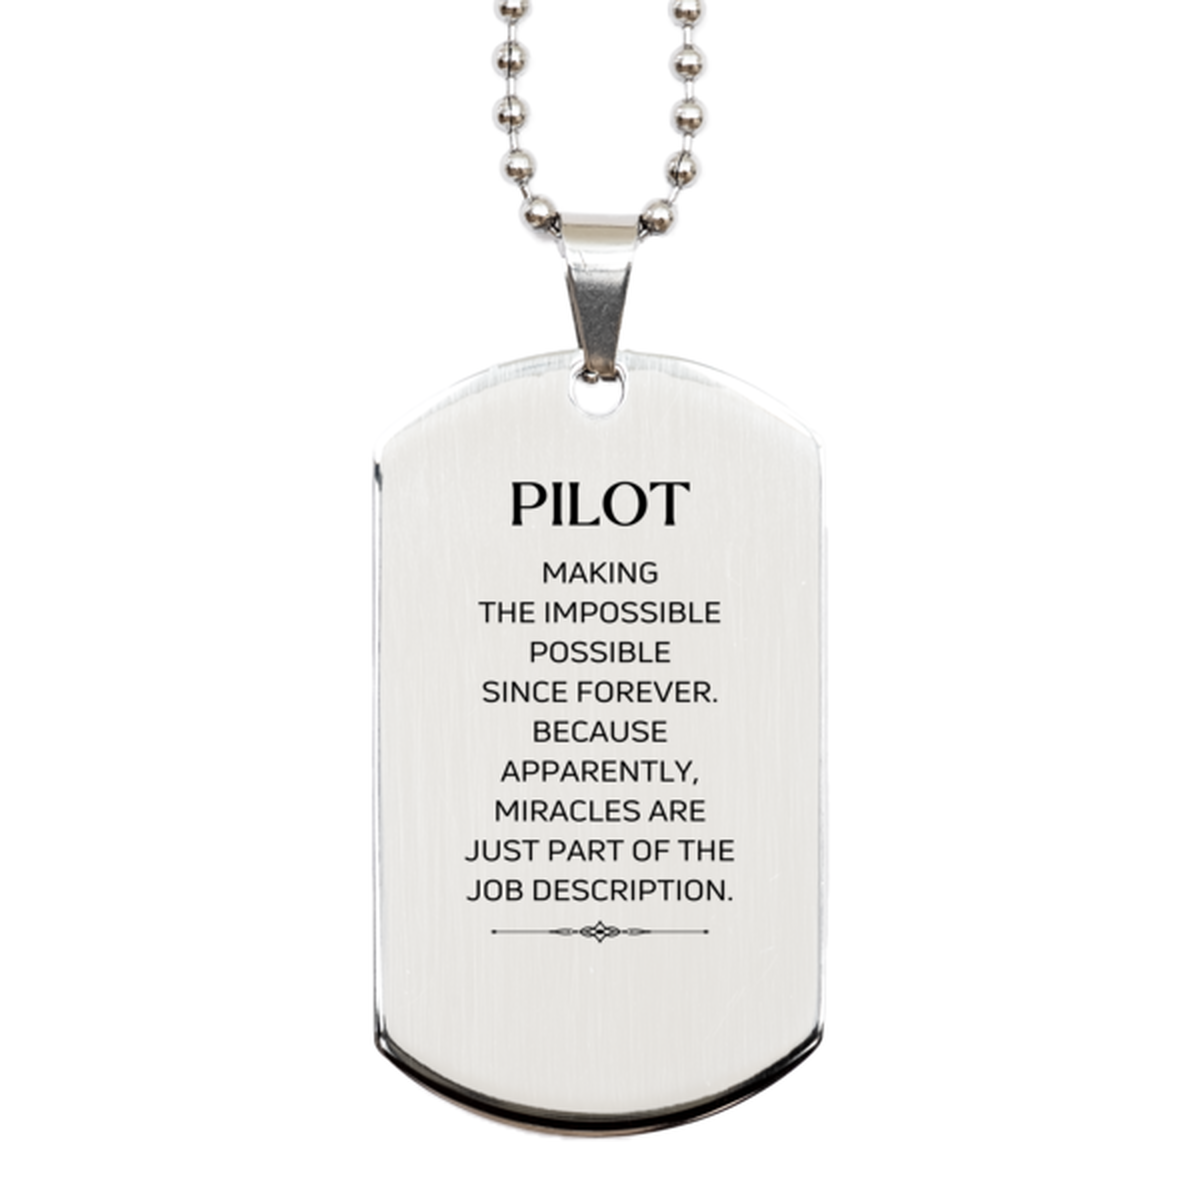 Funny Pilot Gifts, Miracles are just part of the job description, Inspirational Birthday Silver Dog Tag For Pilot, Men, Women, Coworkers, Friends, Boss